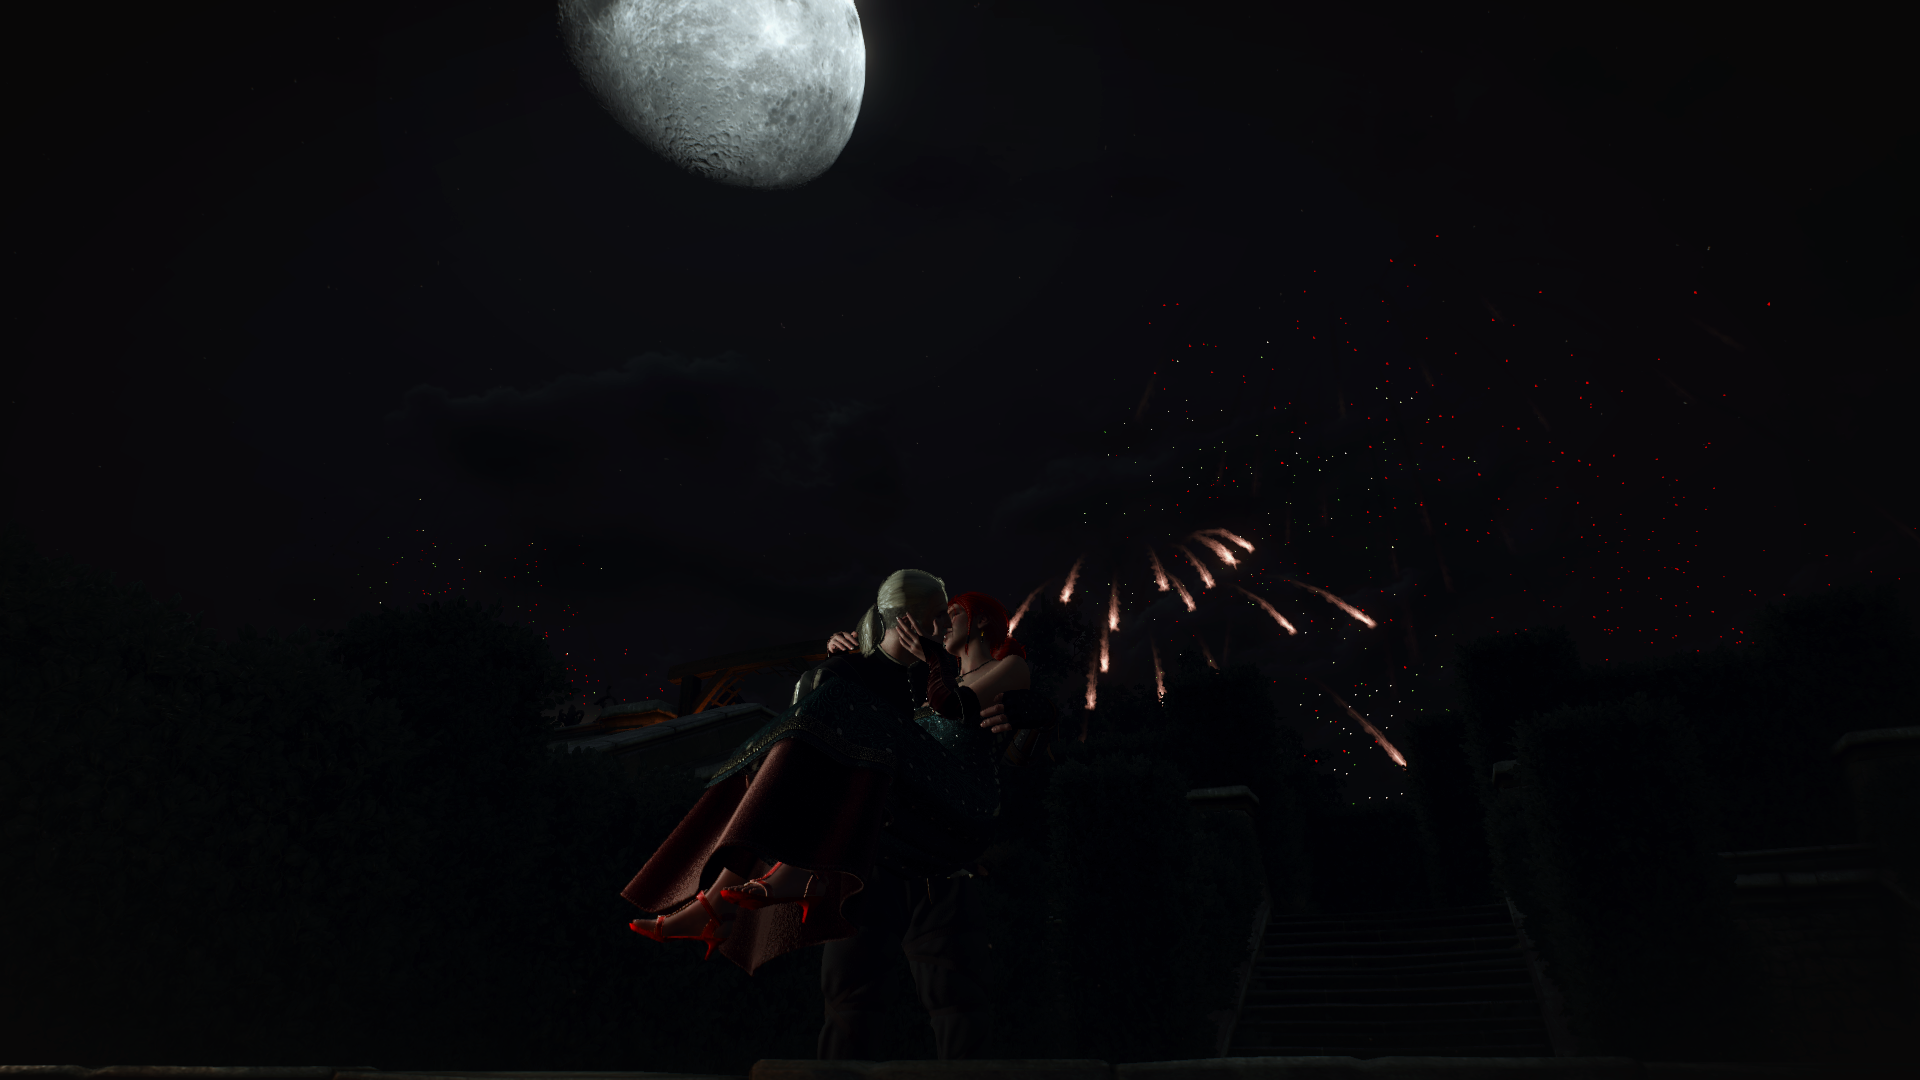 General 1920x1080 The Witcher 3: Wild Hunt video games dark RPG screen shot PC gaming Moon kissing fireworks